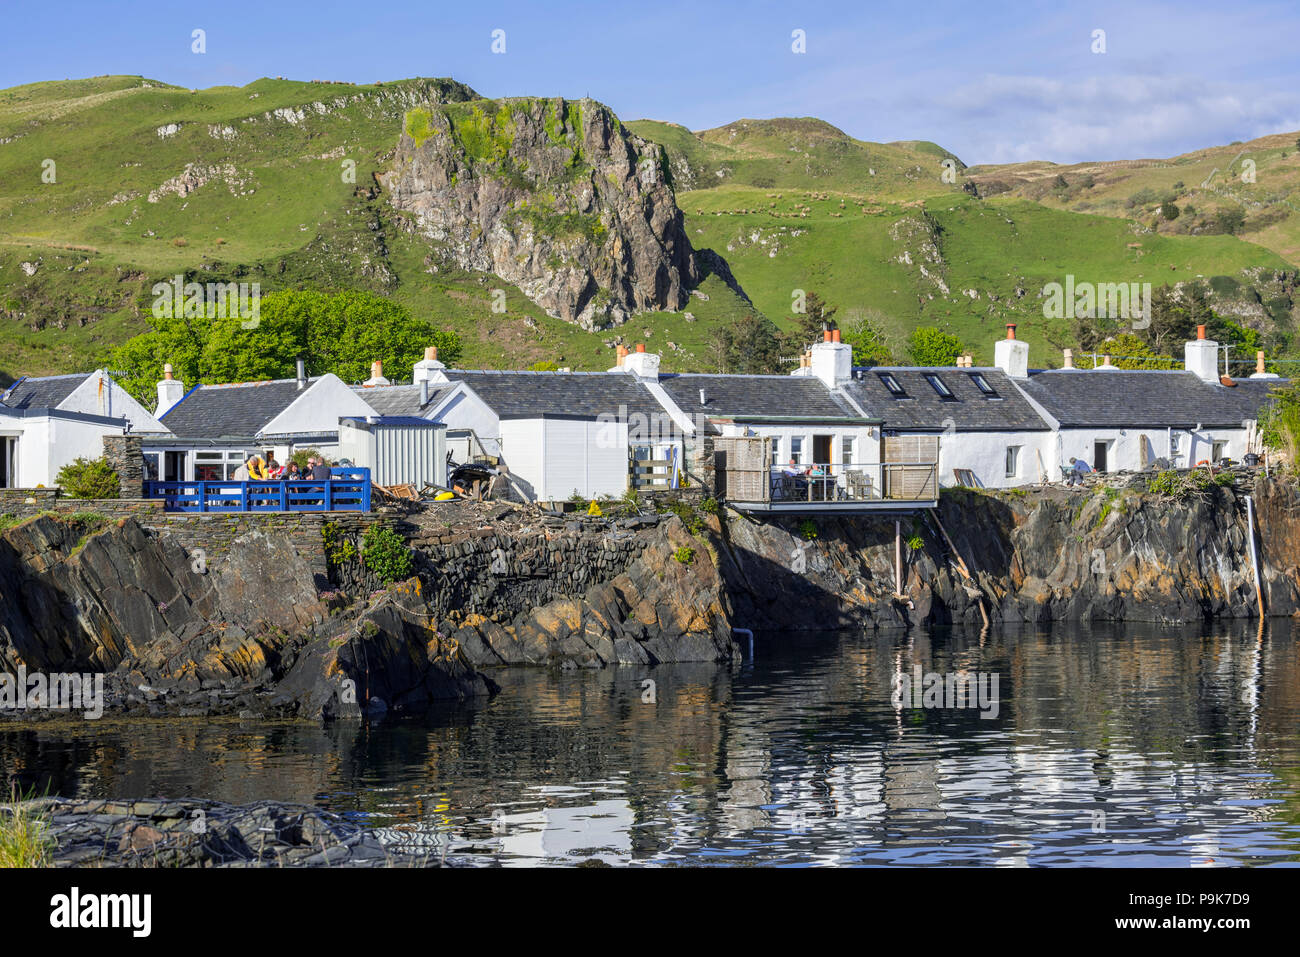 Row of white-harled workers cottages in former slate-mining village Ellenabeich on the isle of Seil, Argyll and Bute, Scotland, UK Stock Photo